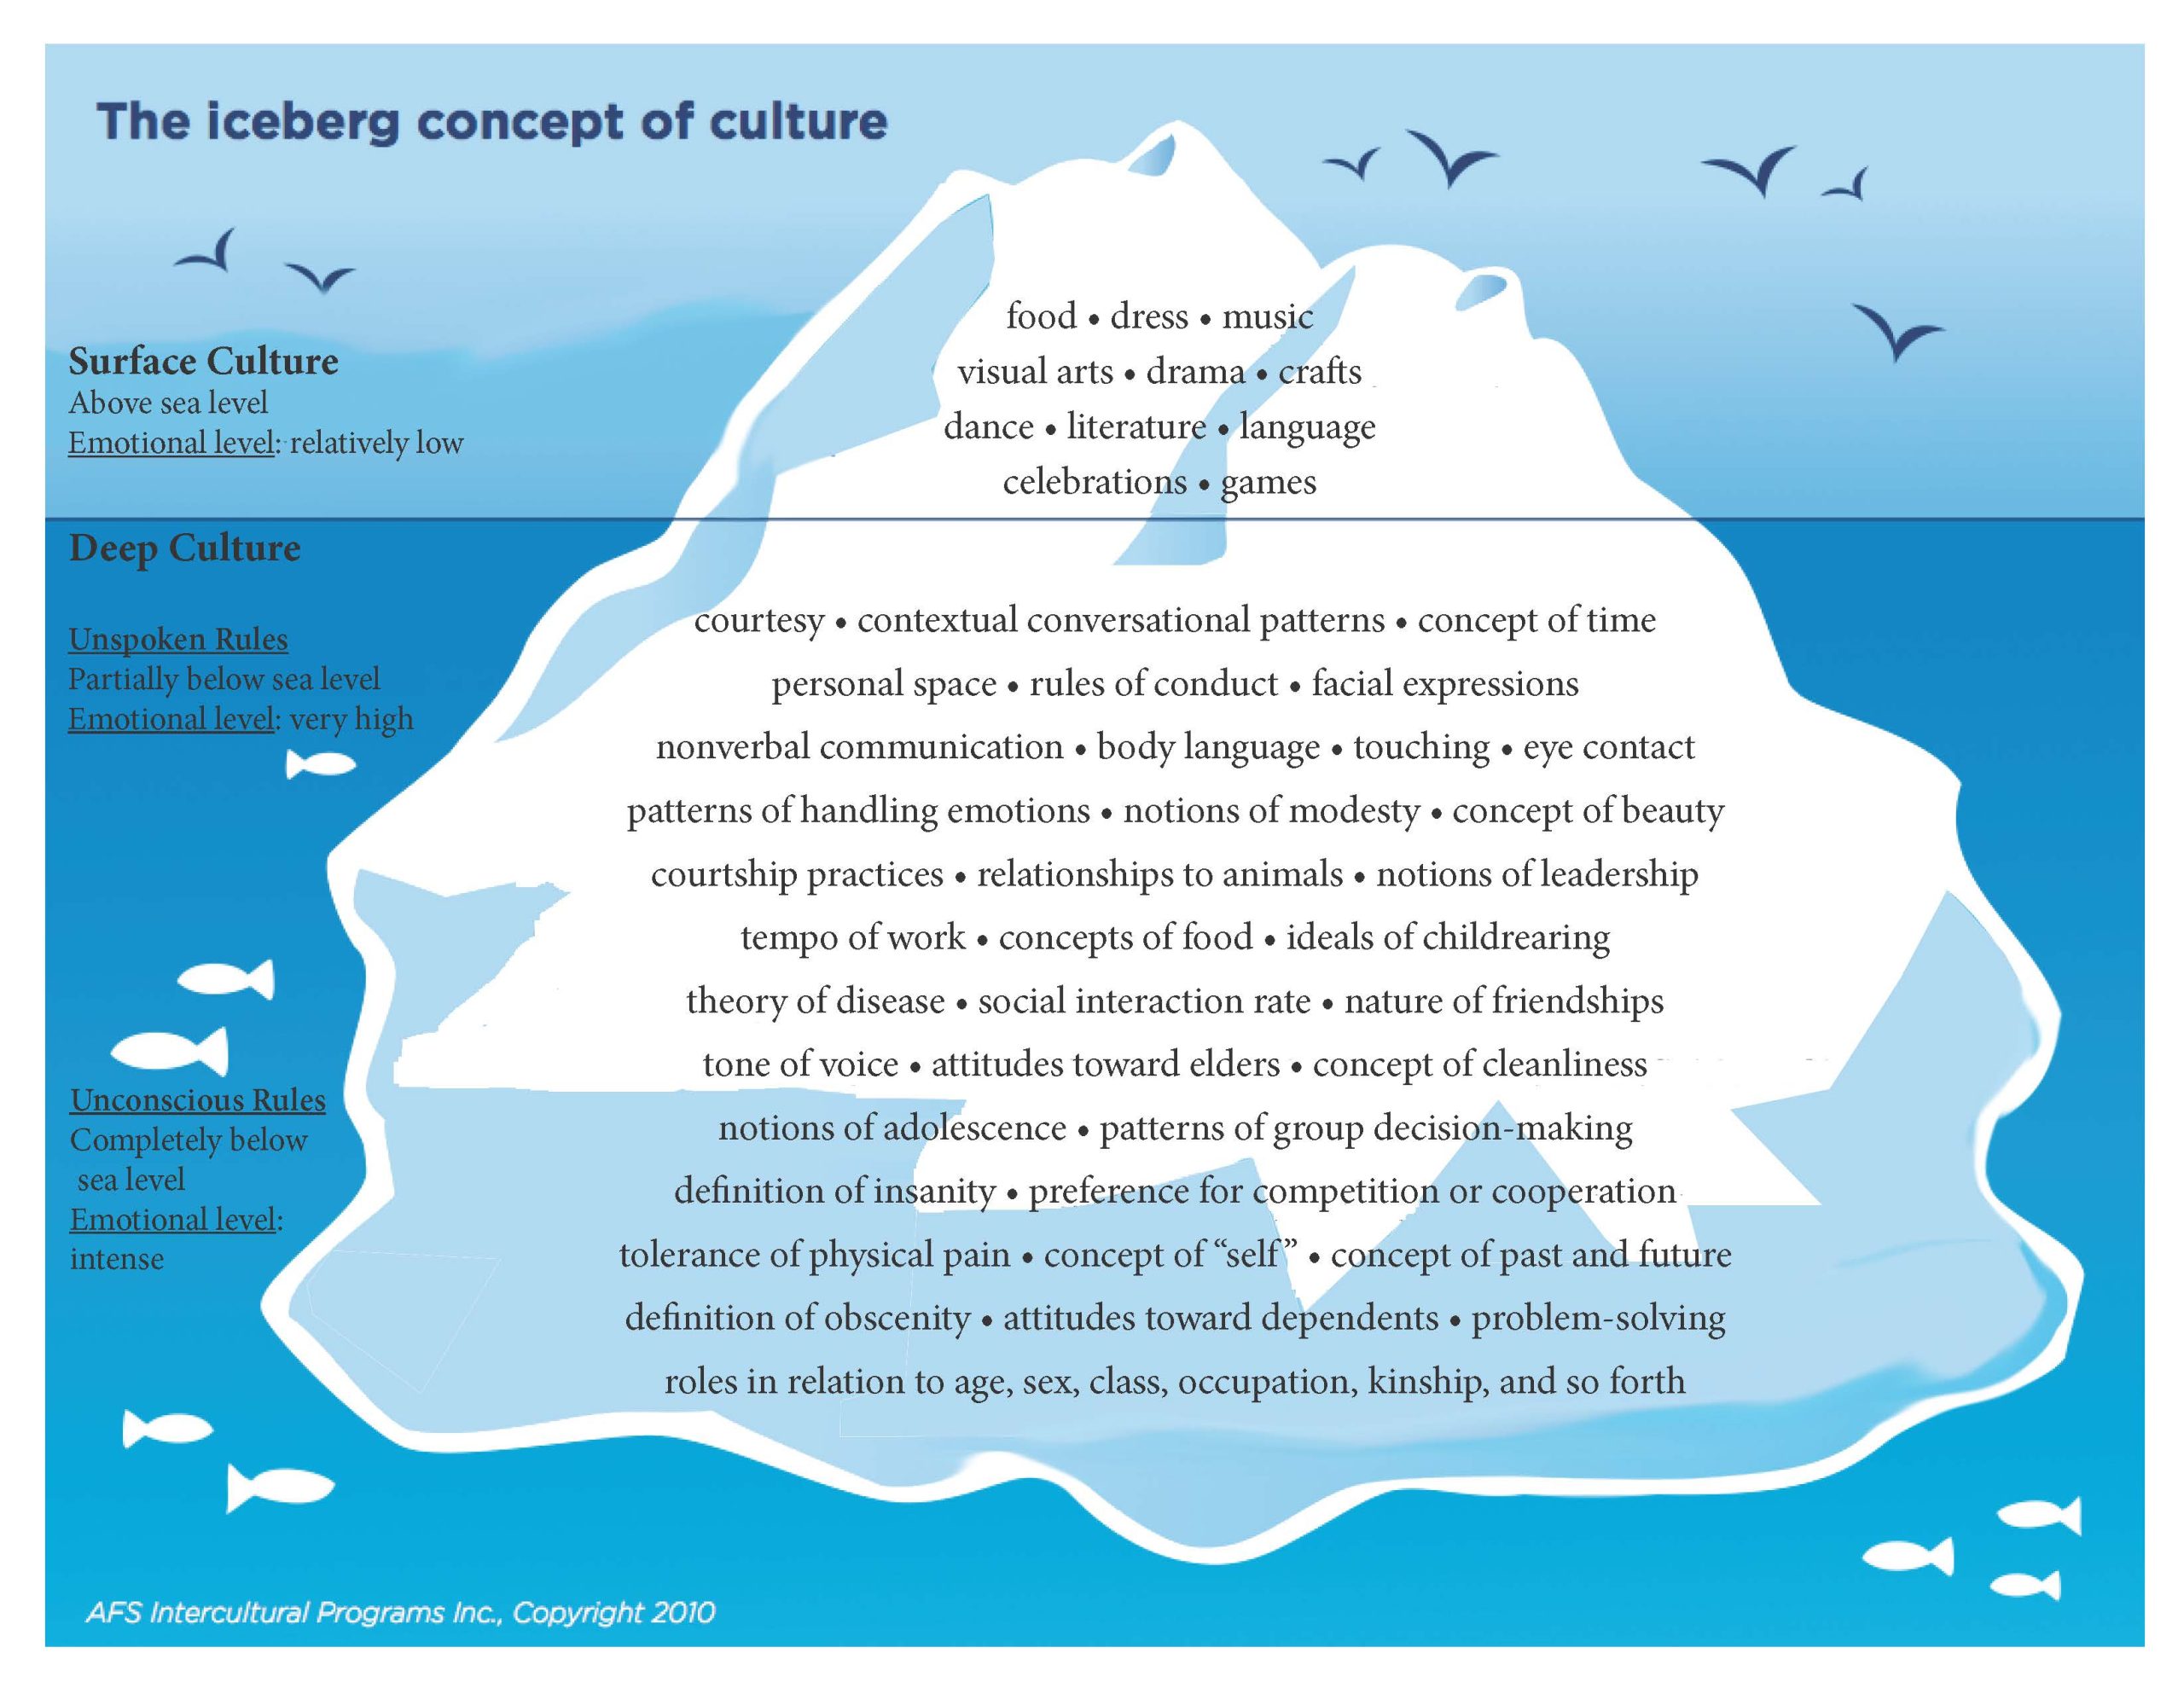 An image of an iceberg. Surface culture examples are written on the visible part of the iceberg. Deep culture examples are written beneath the surface fo the water.